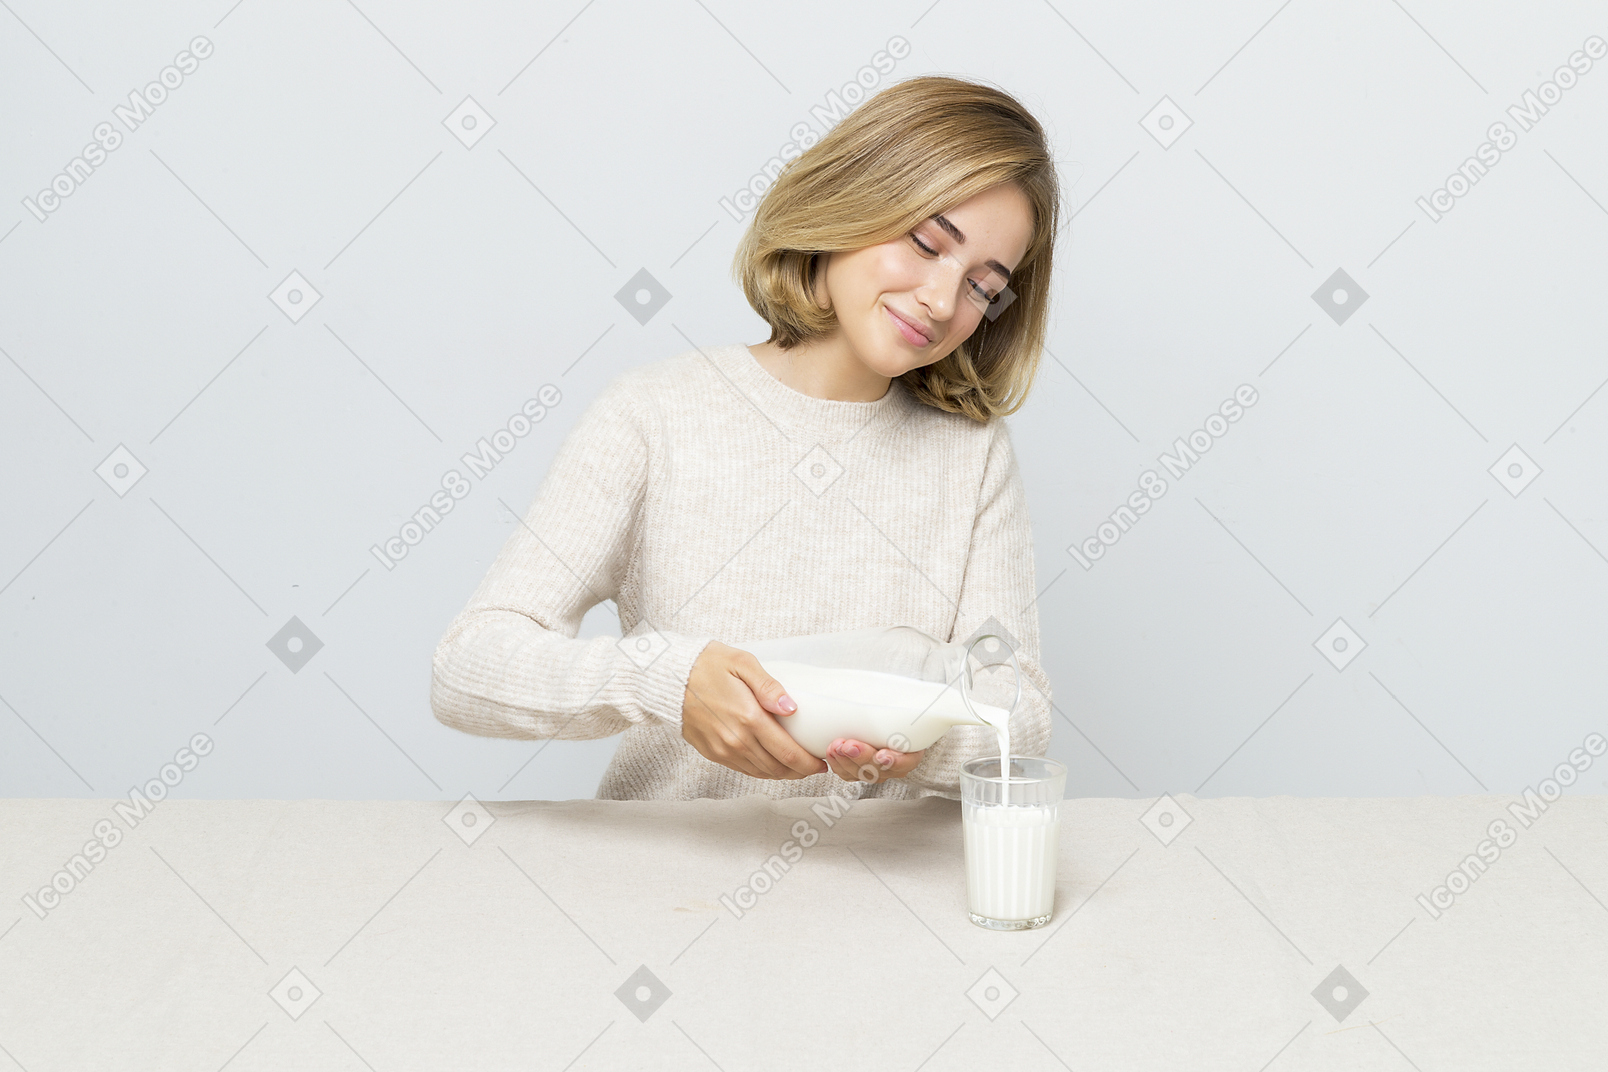 Glass of milk in the day is my ritual